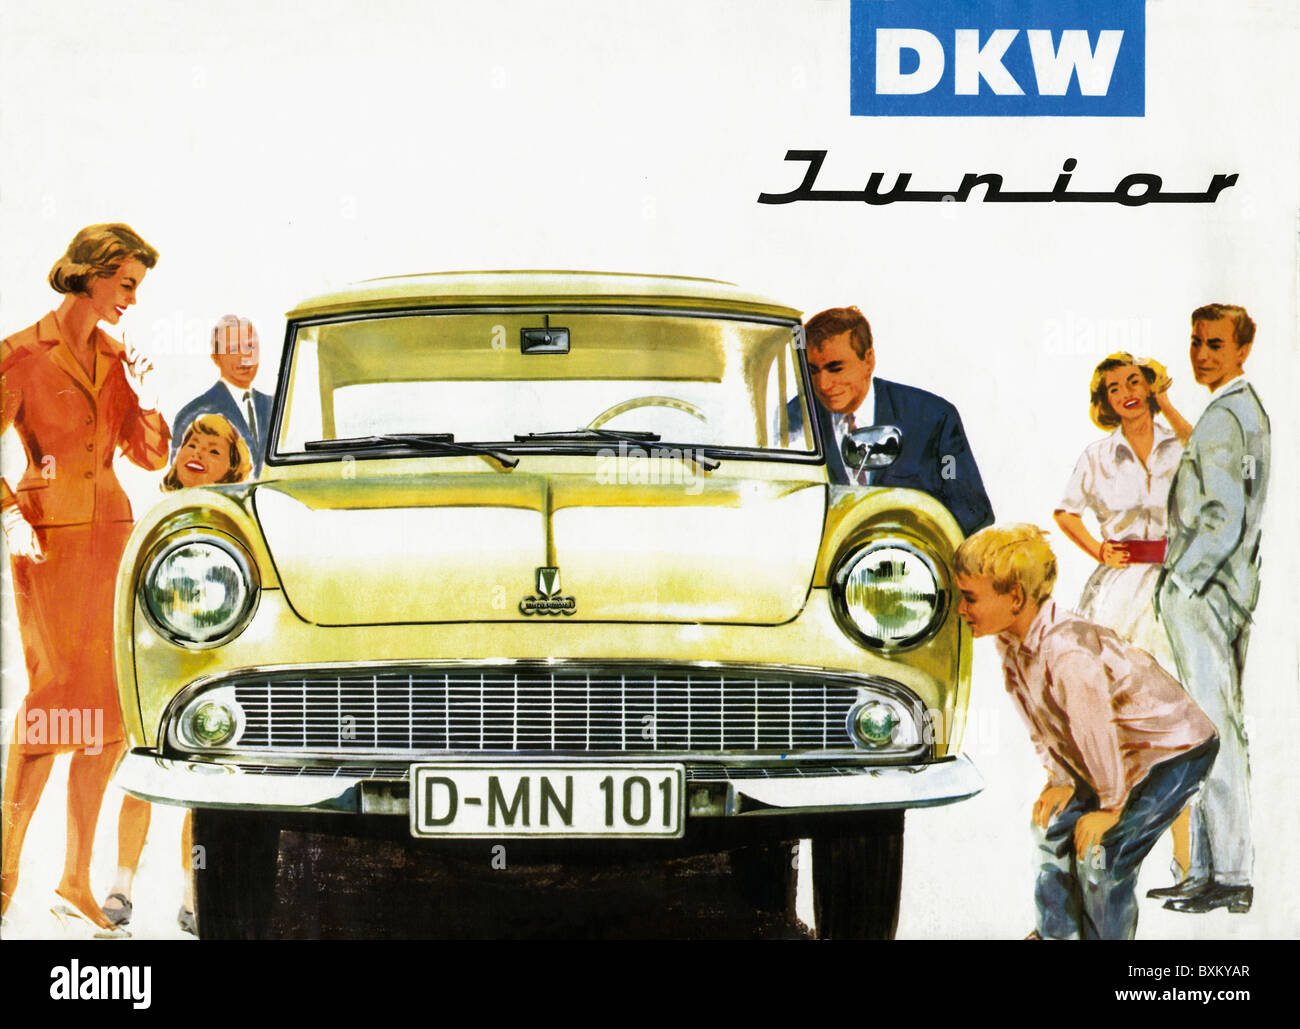 transport / transportation, car, vehicle variants, DKW Junior, made by Auto Union GmbH, family gazing the new car, Germany, 1959, Additional-Rights-Clearences-Not Available Stock Photo